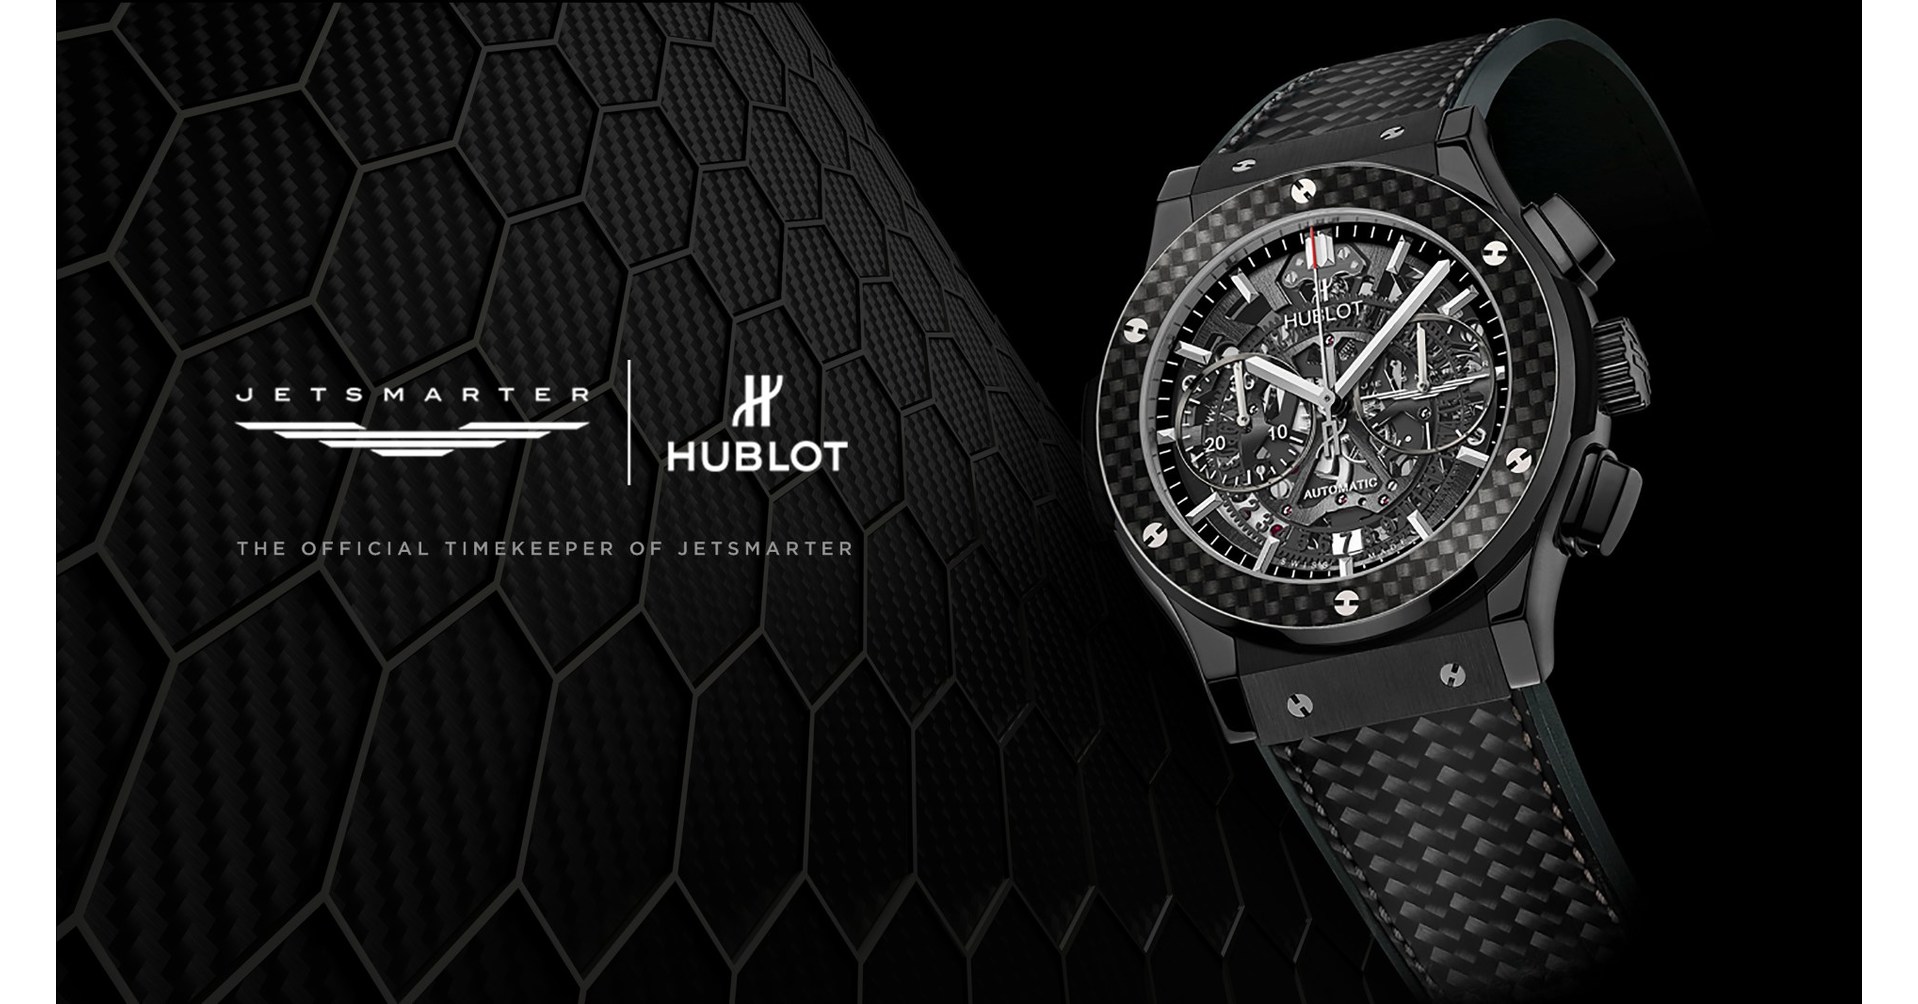 Jetsmarter And Hublot Partner To Launch Exclusive Limited Edition Time Pieces